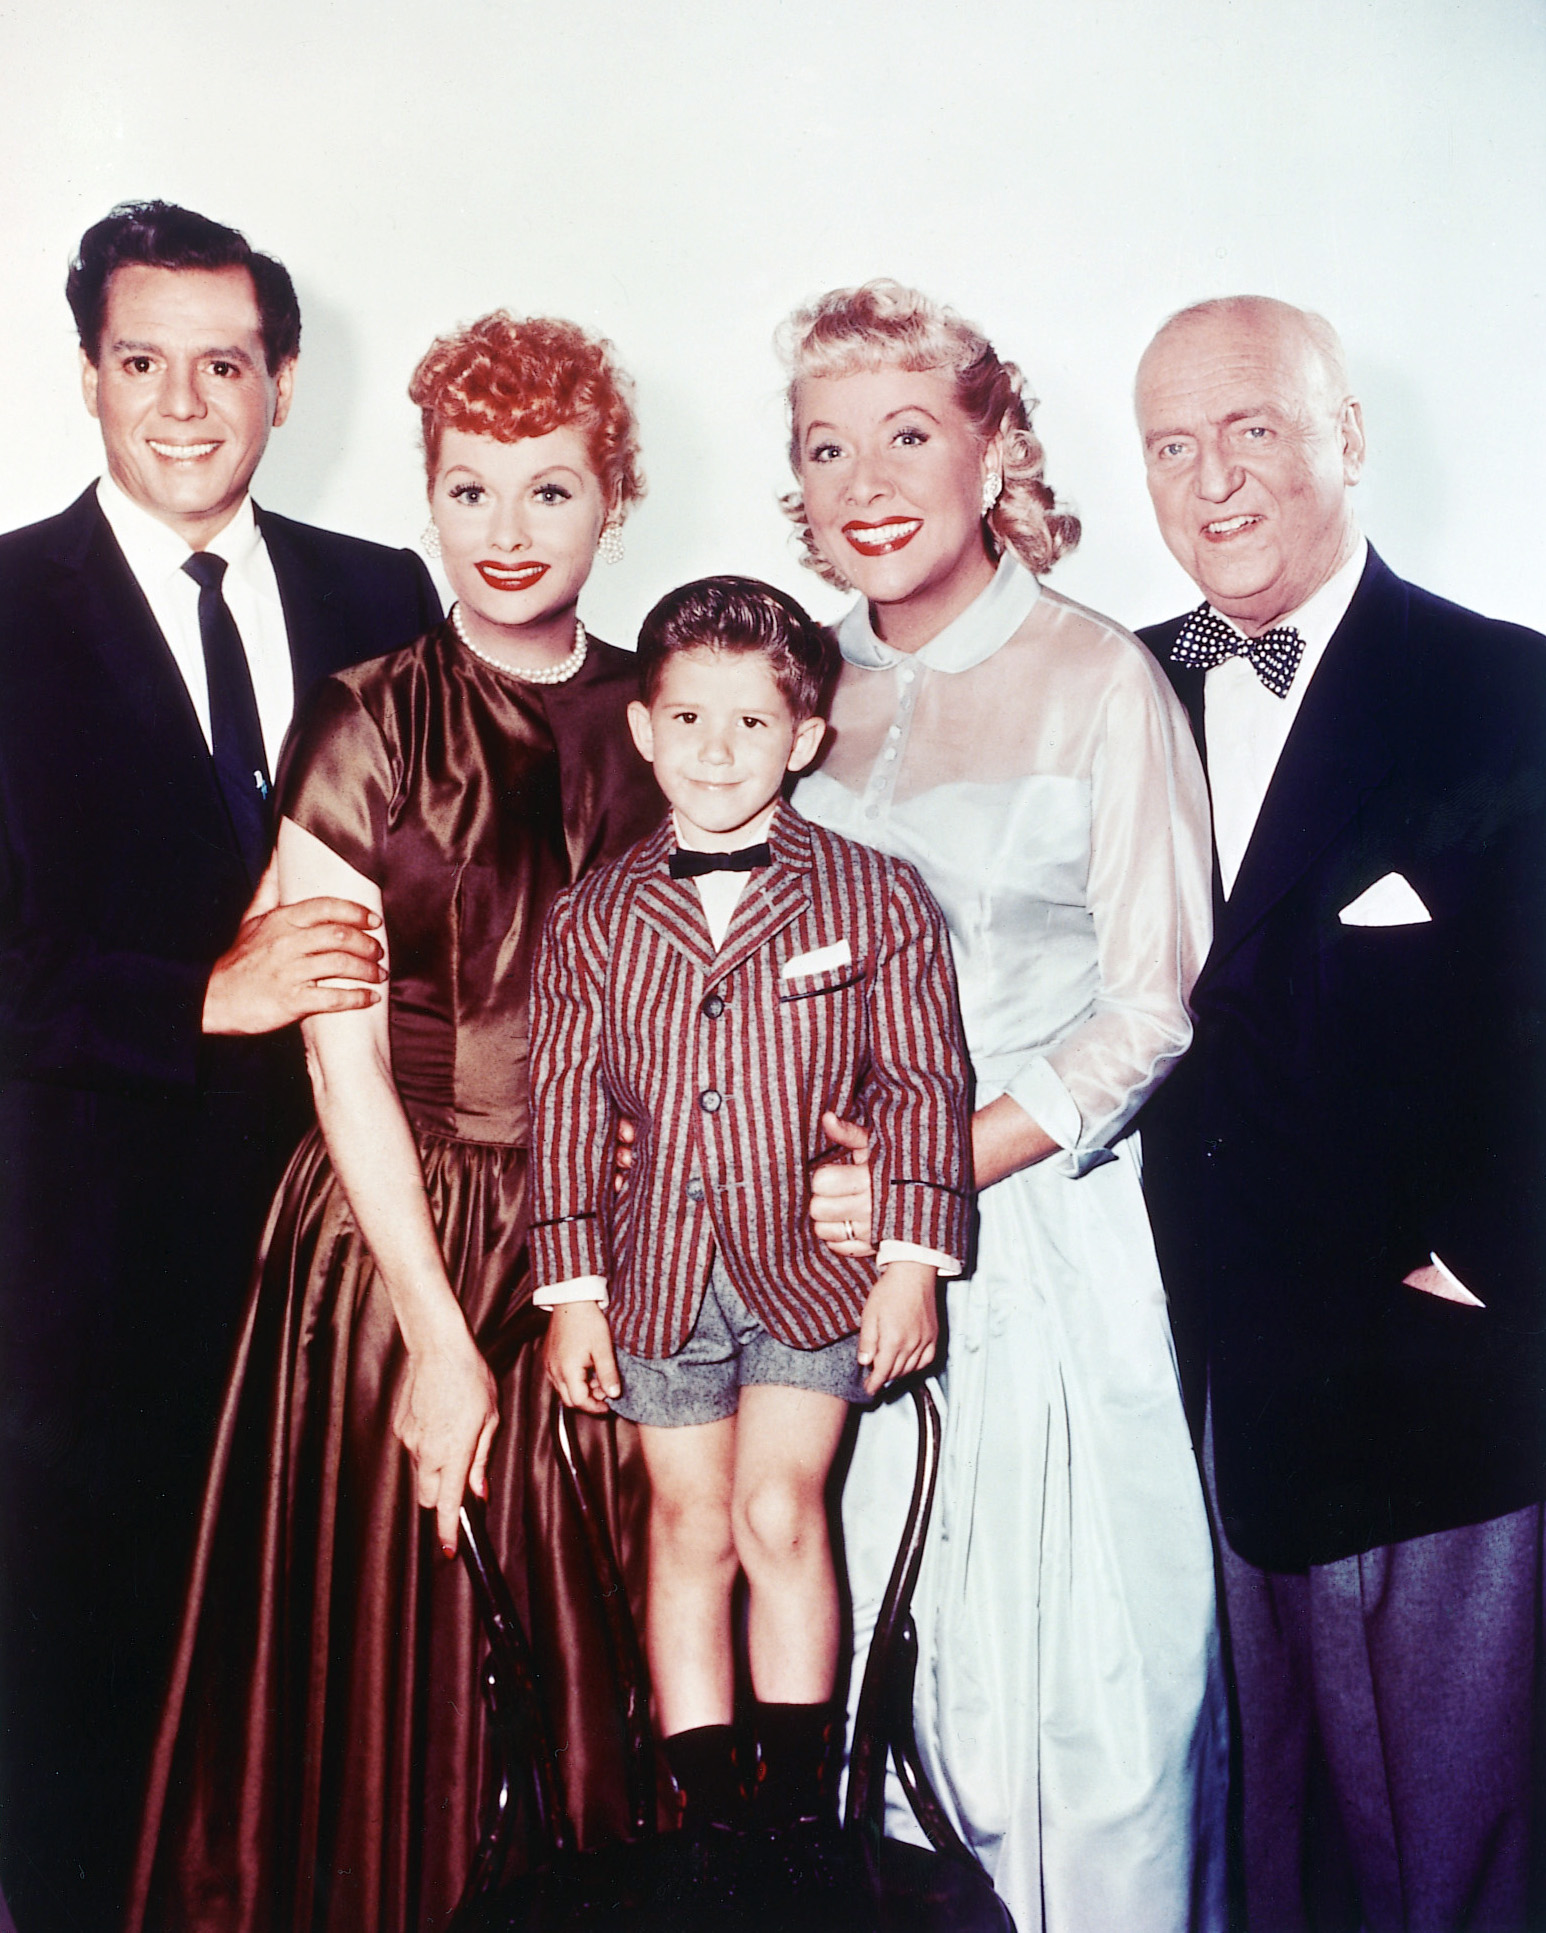 Still of Lucille Ball, Desi Arnaz Jr., William Frawley, Richard Keith and Vivian Vance in I Love Lucy (1951)